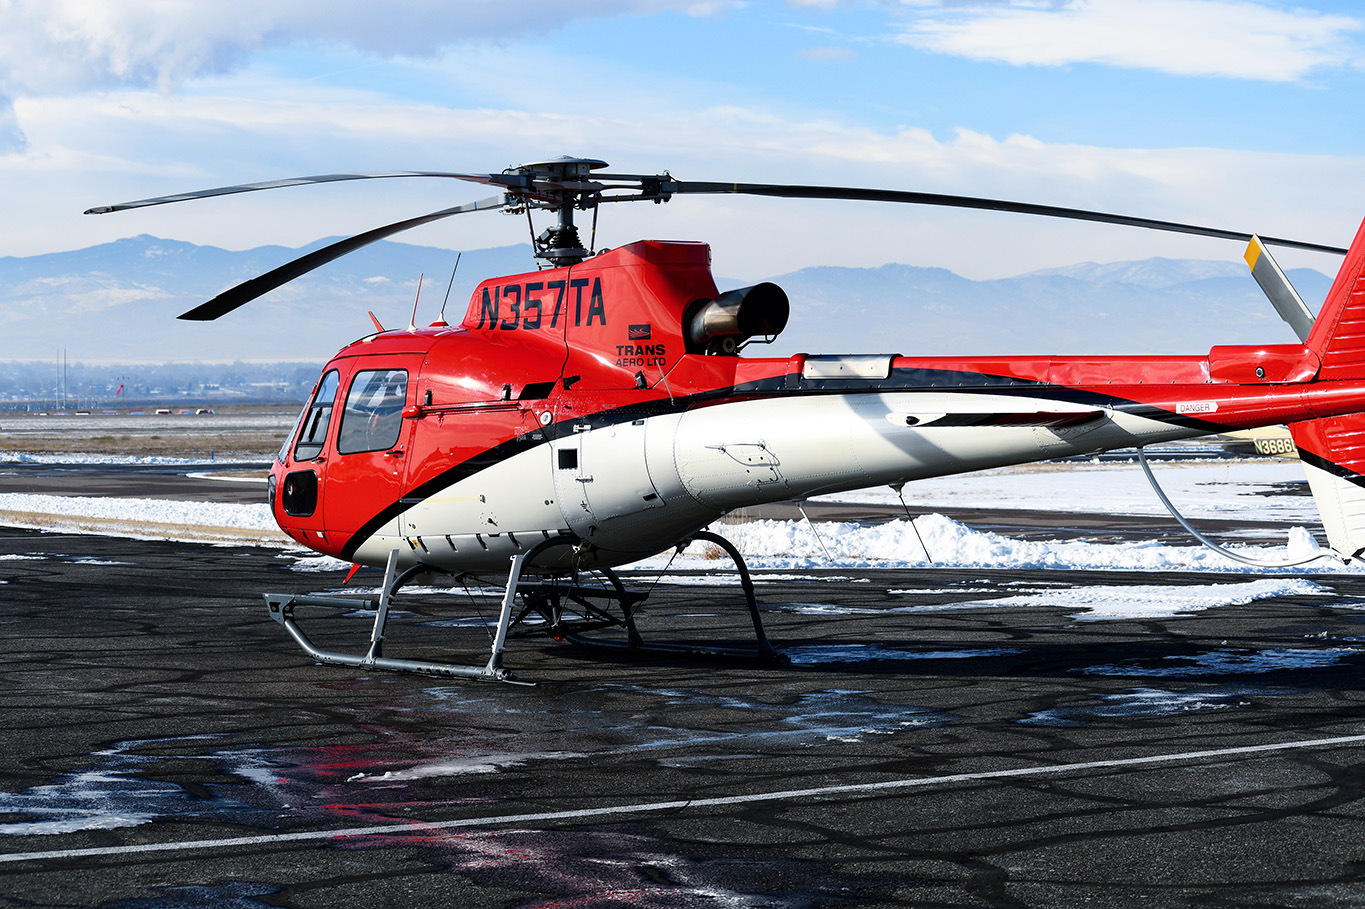 An Airbus Helicopters AS350 B3 sits on a helipad